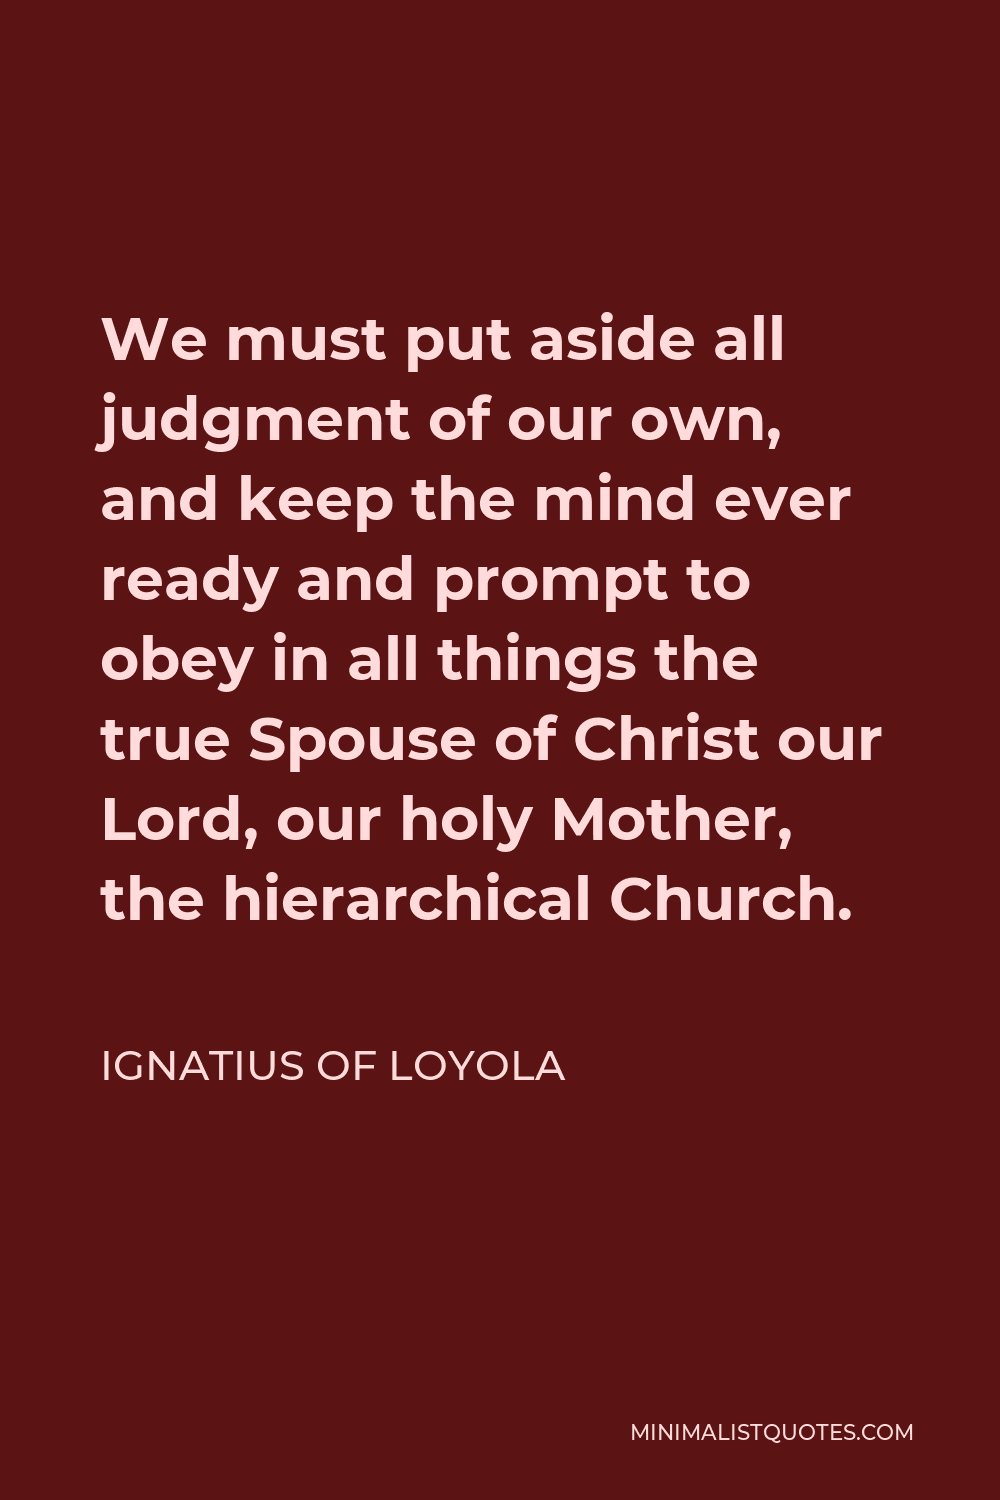 Ignatius of Loyola Quote - We must put aside all judgment of our own, and keep the mind ever ready and prompt to obey in all things the true Spouse of Christ our Lord, our holy Mother, the hierarchical Church.